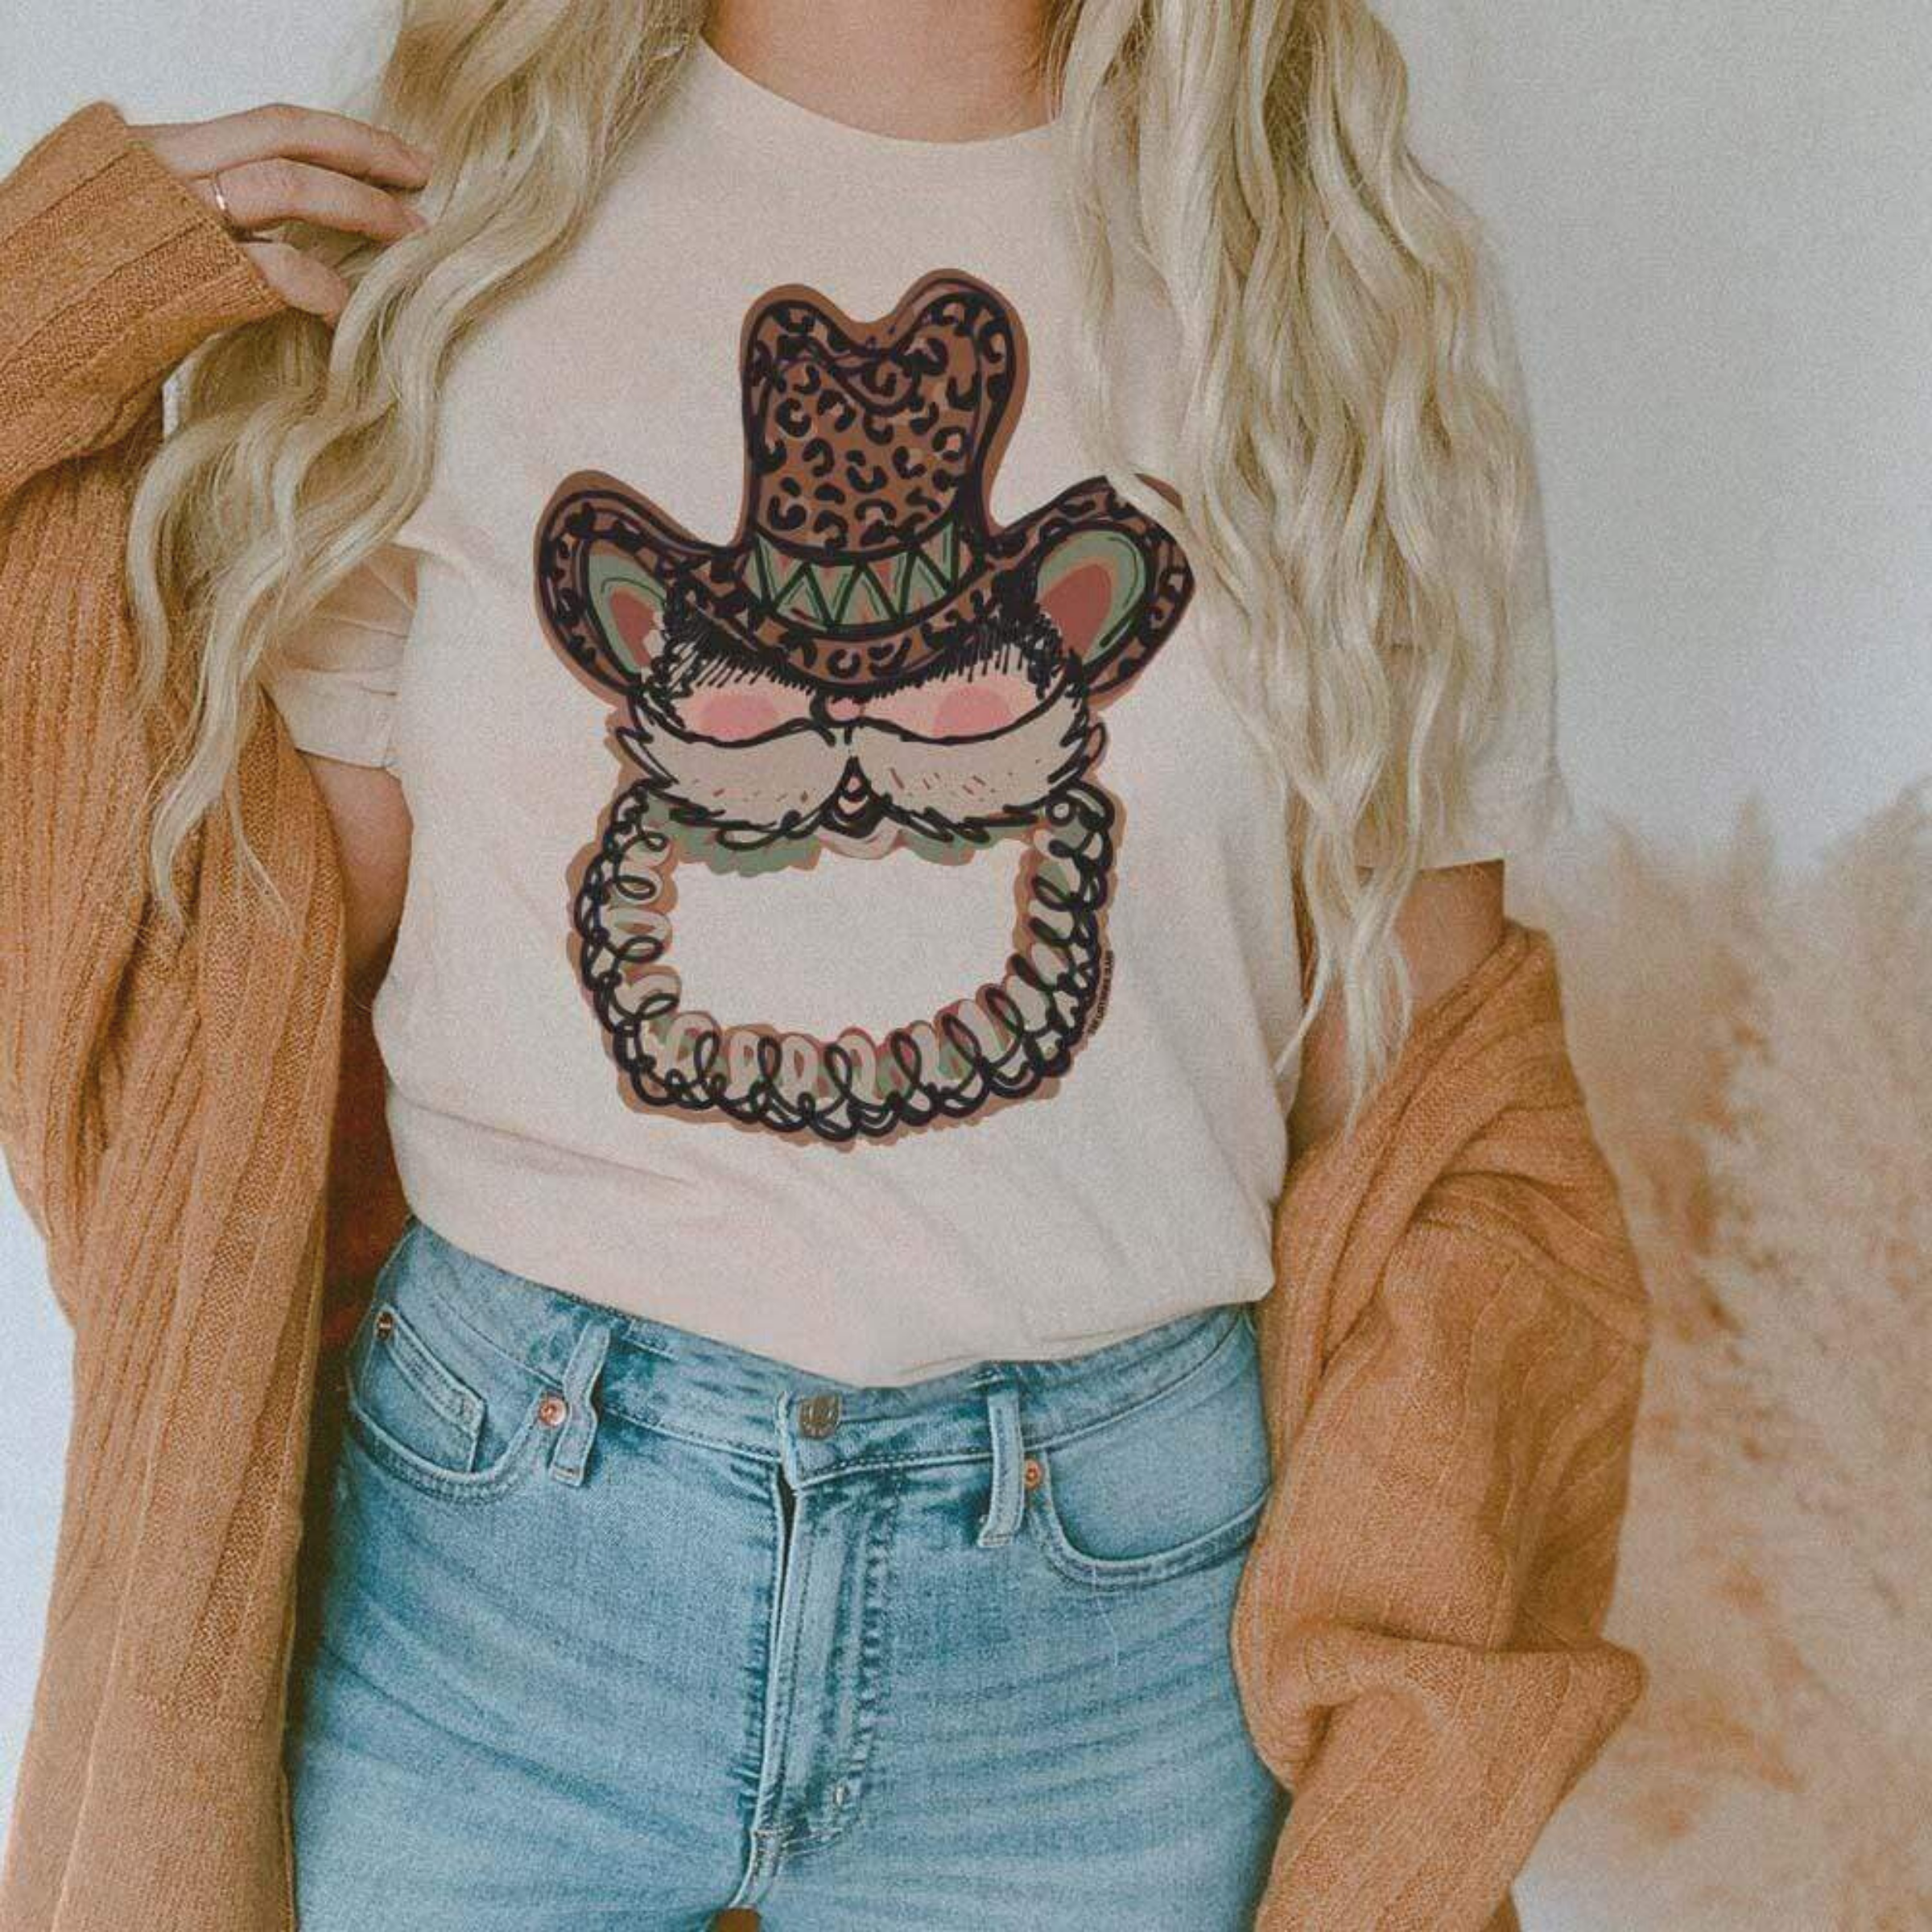 This cream tee includes a crew neckline, short sleeves, and a Santa Clause graphic with him wearing a leopard print cowboy hat. The model has this tee styled with rolled sleeves, a camel cardigan, and a light wash pair of denim jeans. 